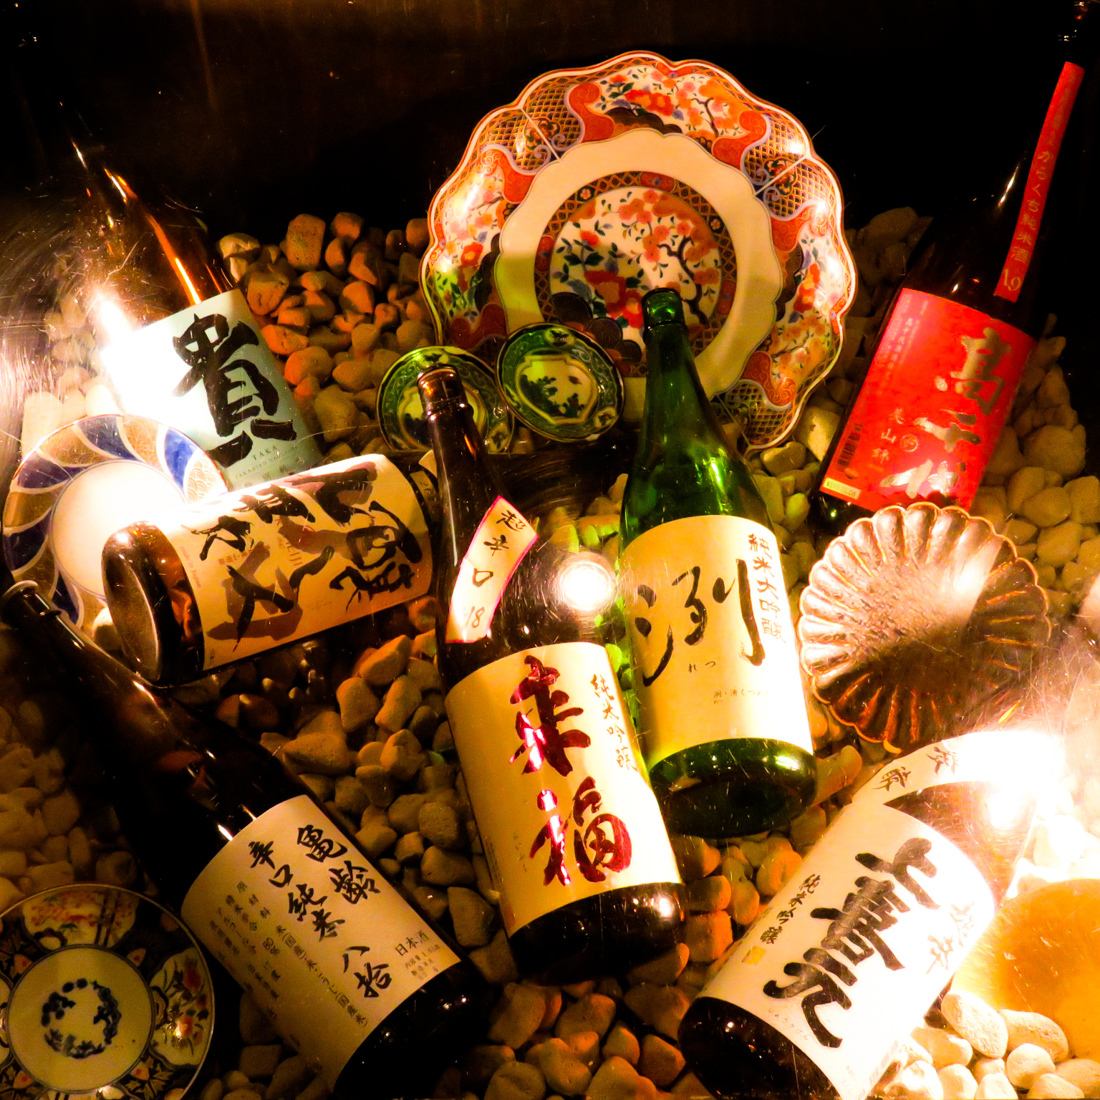 We have delicious Japanese sake that goes well with rice!